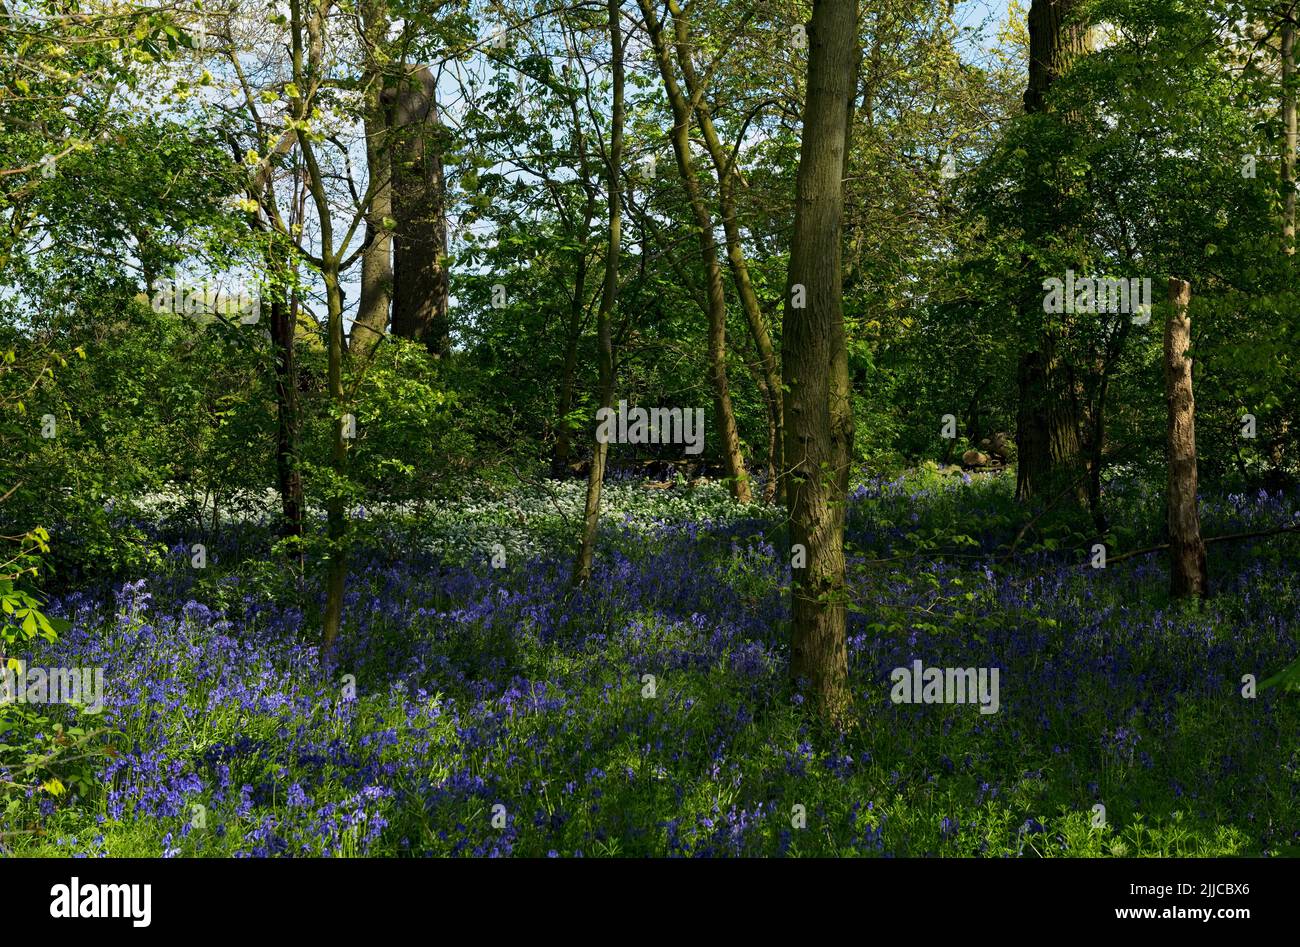 Wild English bluebells flower blue flowers and wild garlic flowering growing in a wood woods woodland trees spring North Yorkshire England UK Stock Photo